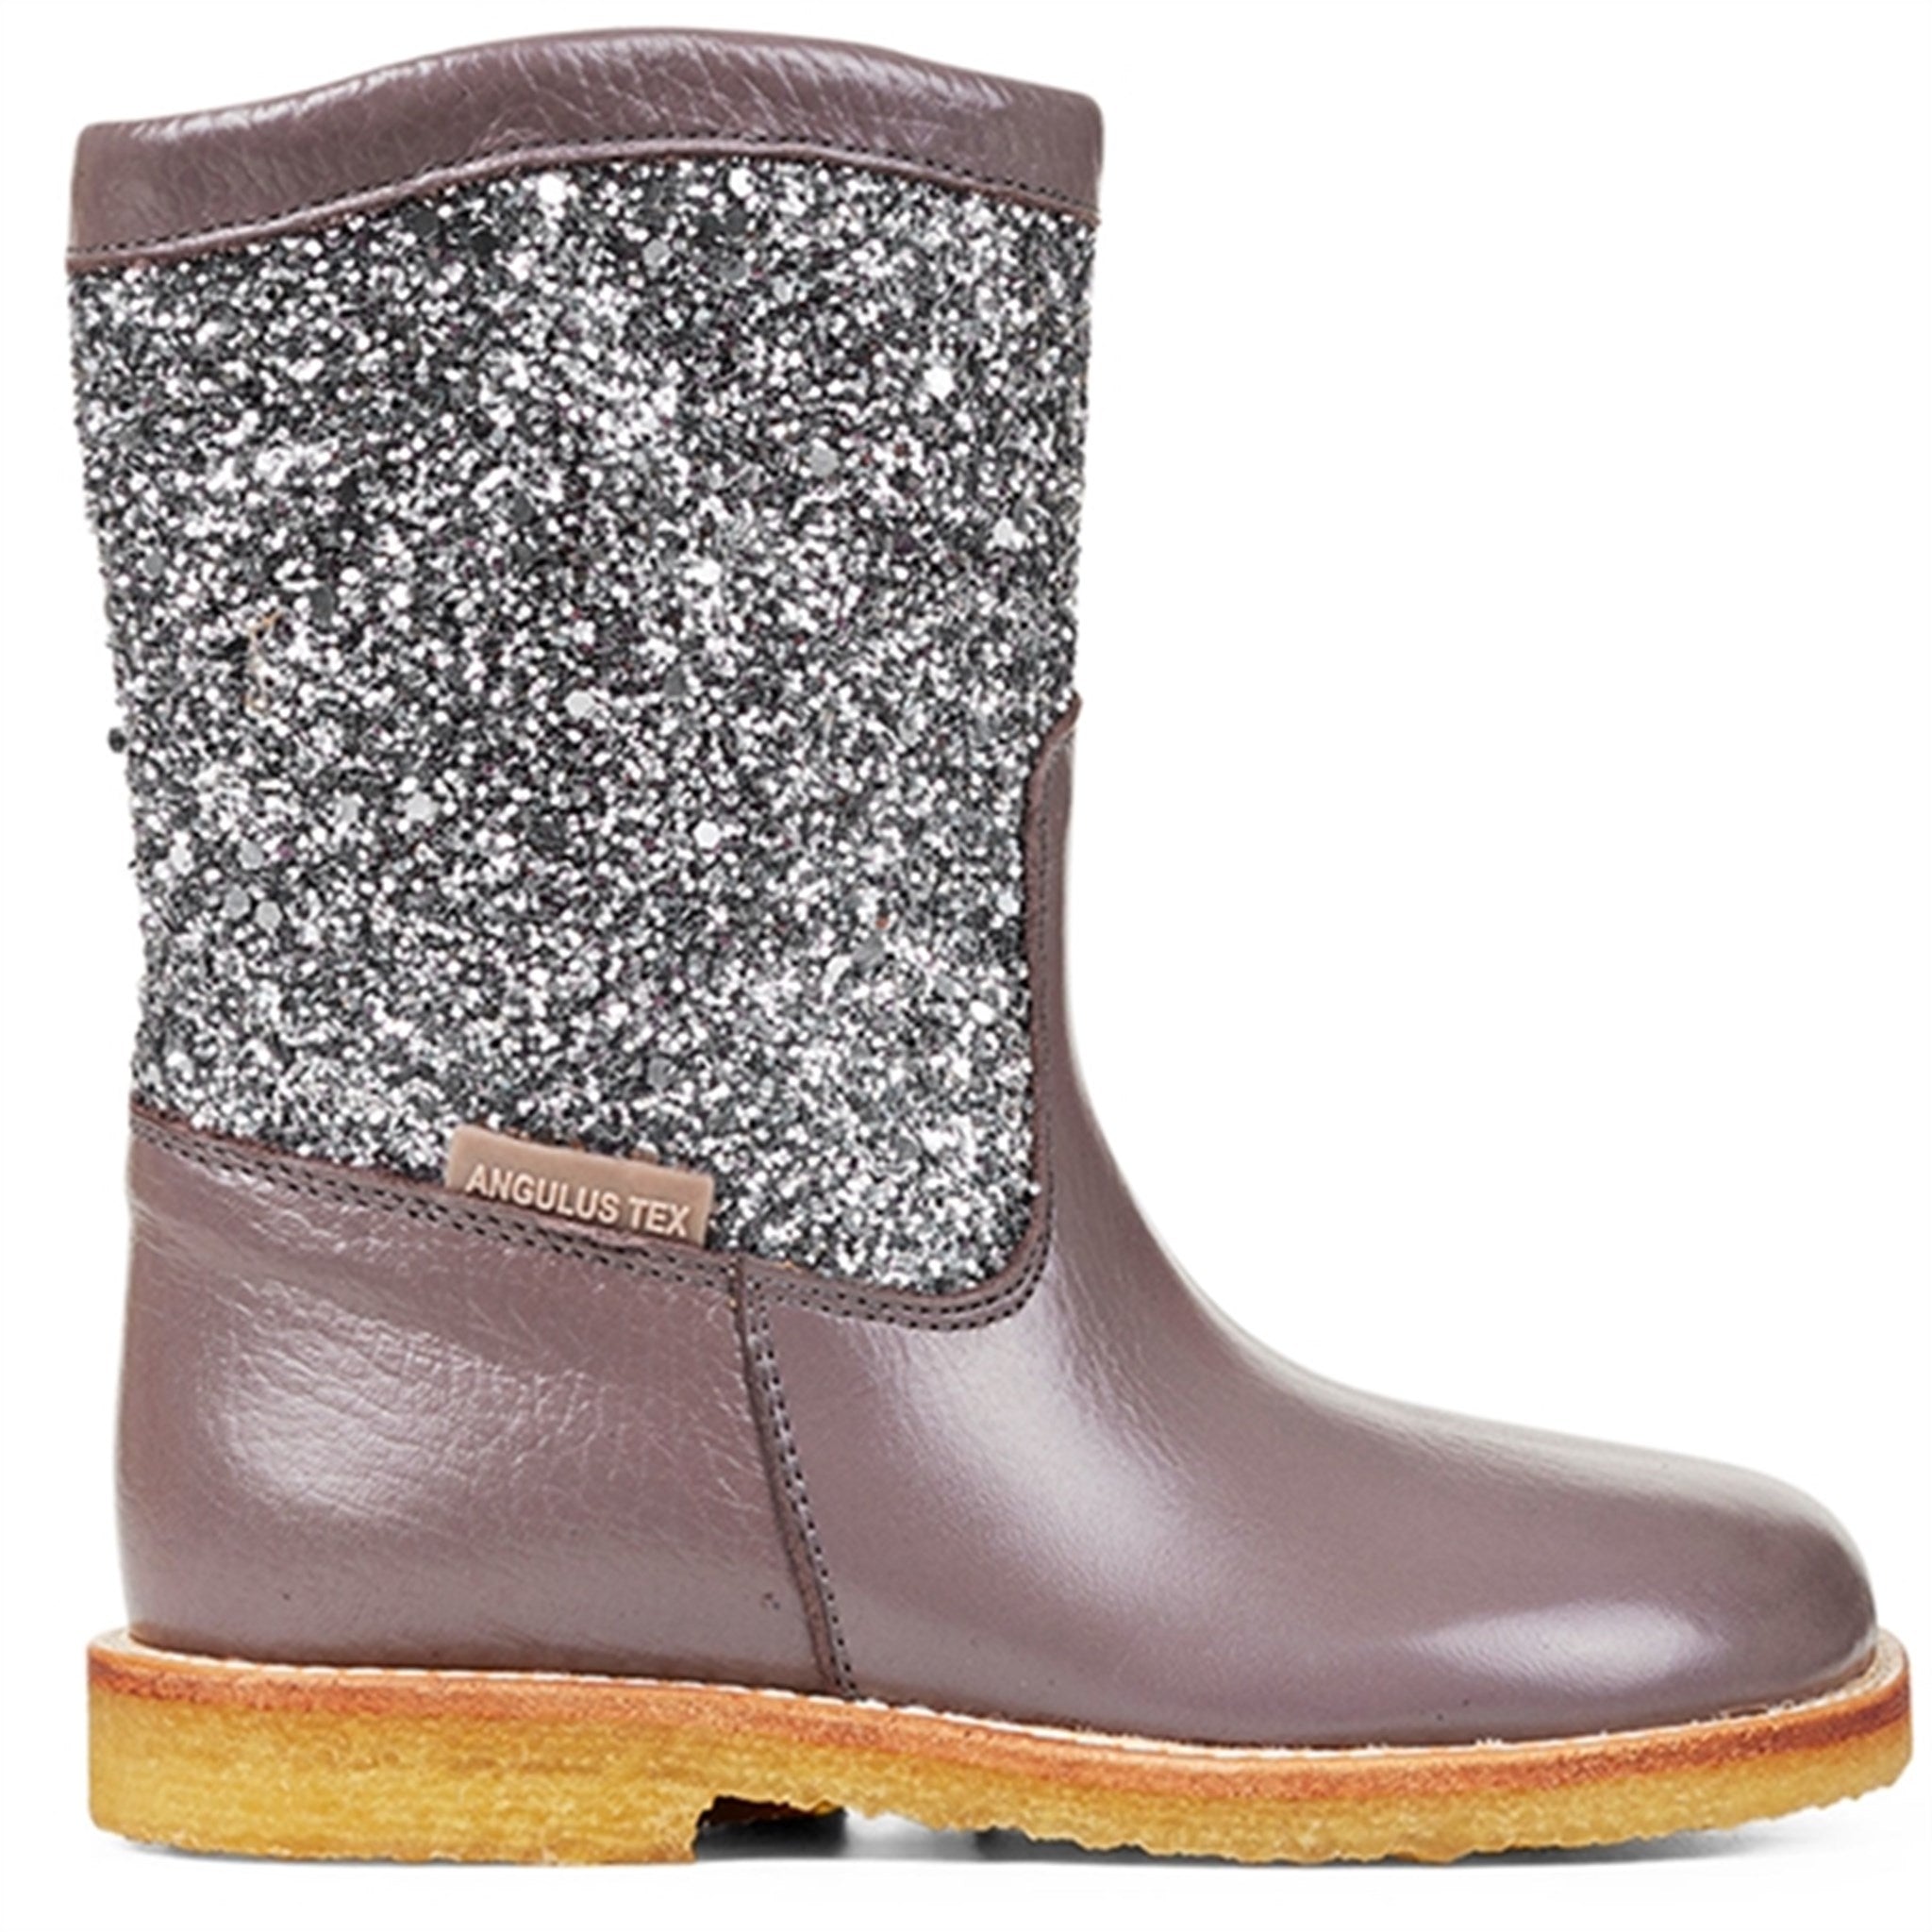 Angulus Tex Boots With Zipper Lavender/Dusty Lavender Glitter 2